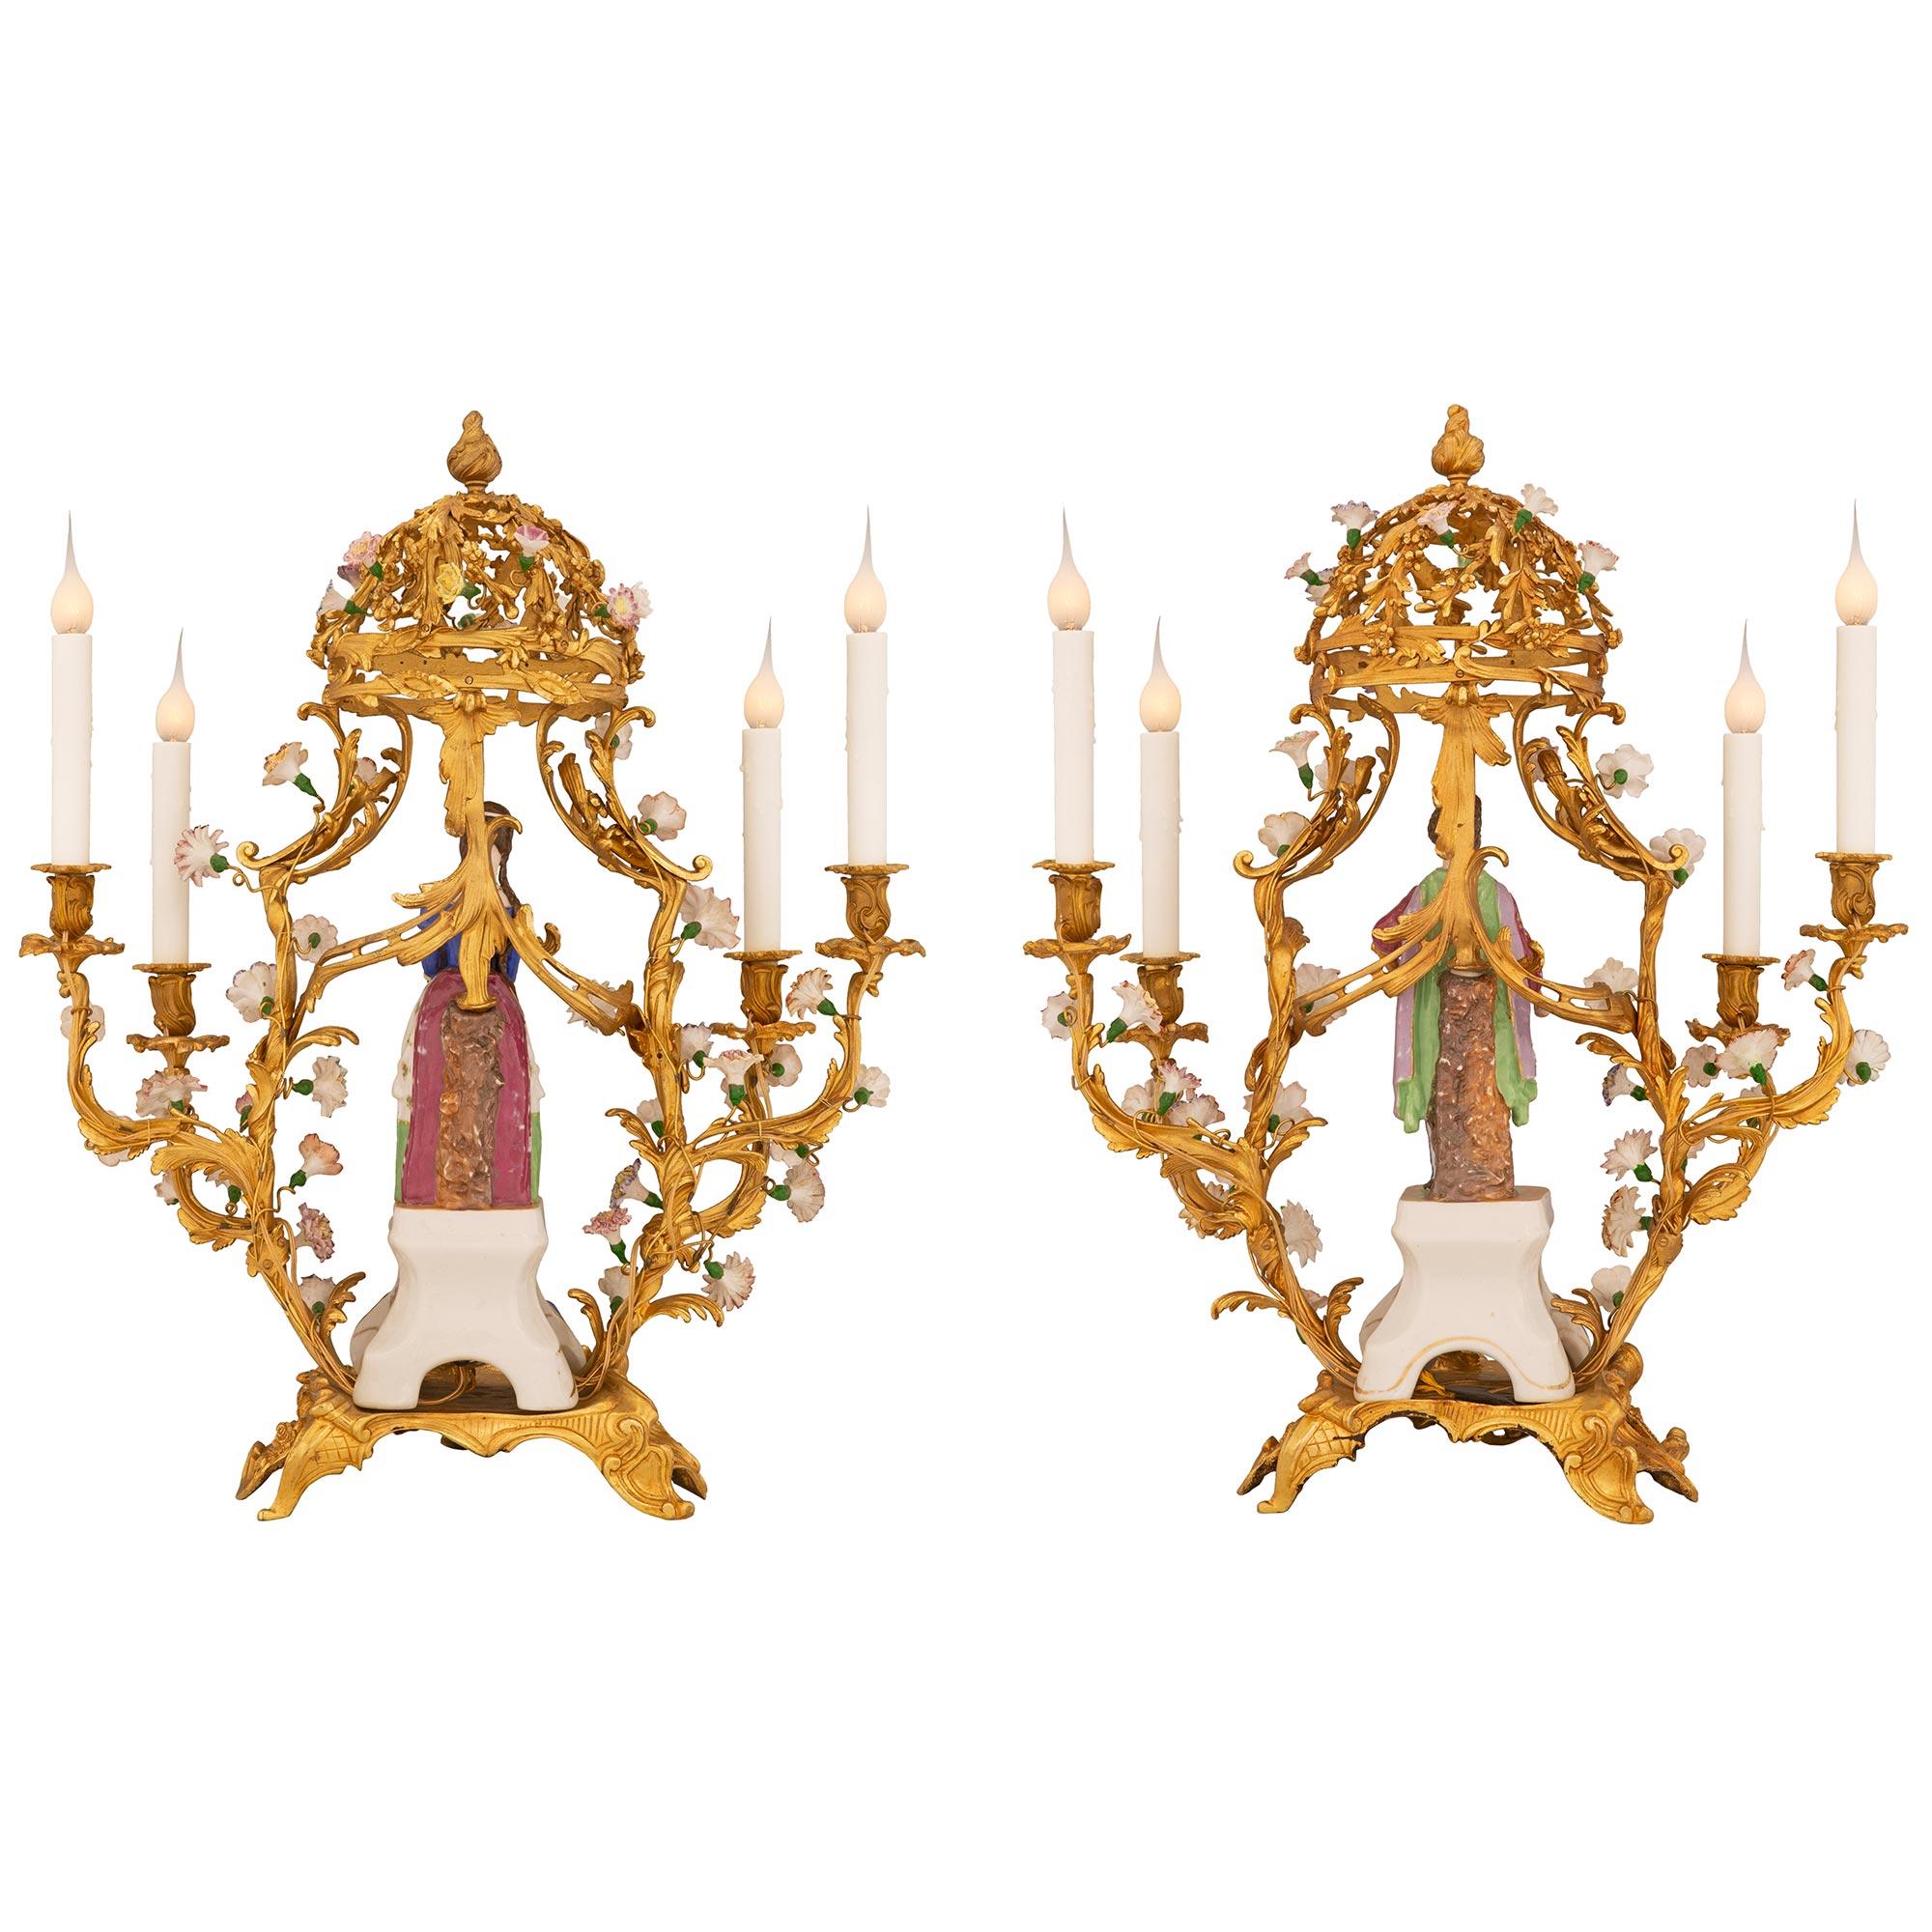 True Pair of French Turn of the Century Louis XV St. Porcelain Candelabra Lamps For Sale 7